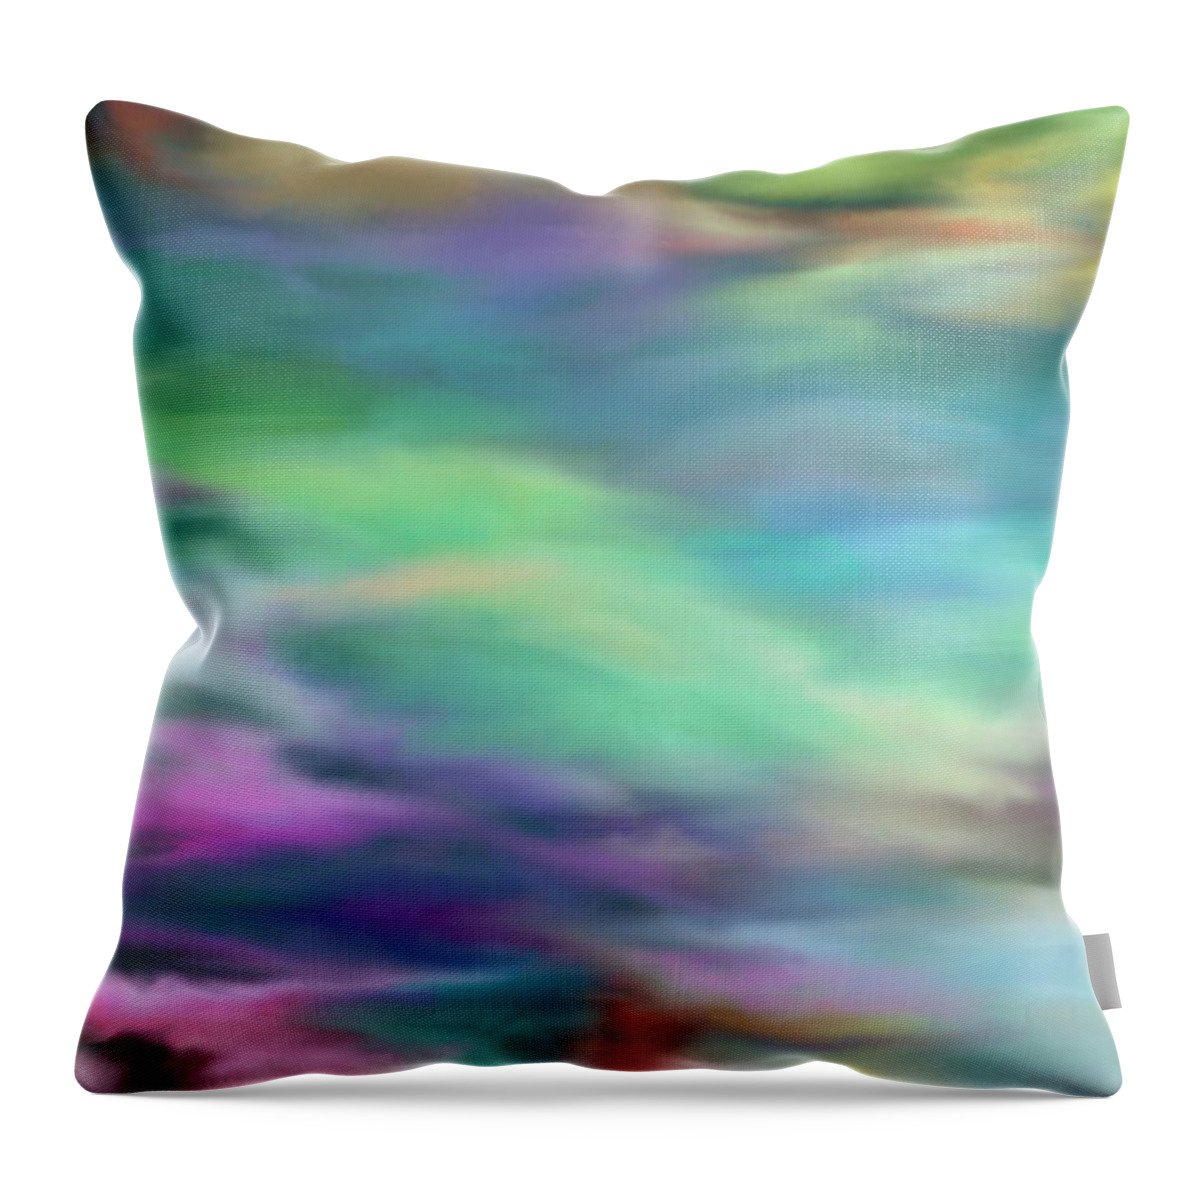 Tidal Pool Throw Pillow featuring the painting Tidal Pool by Stephen Jorgensen